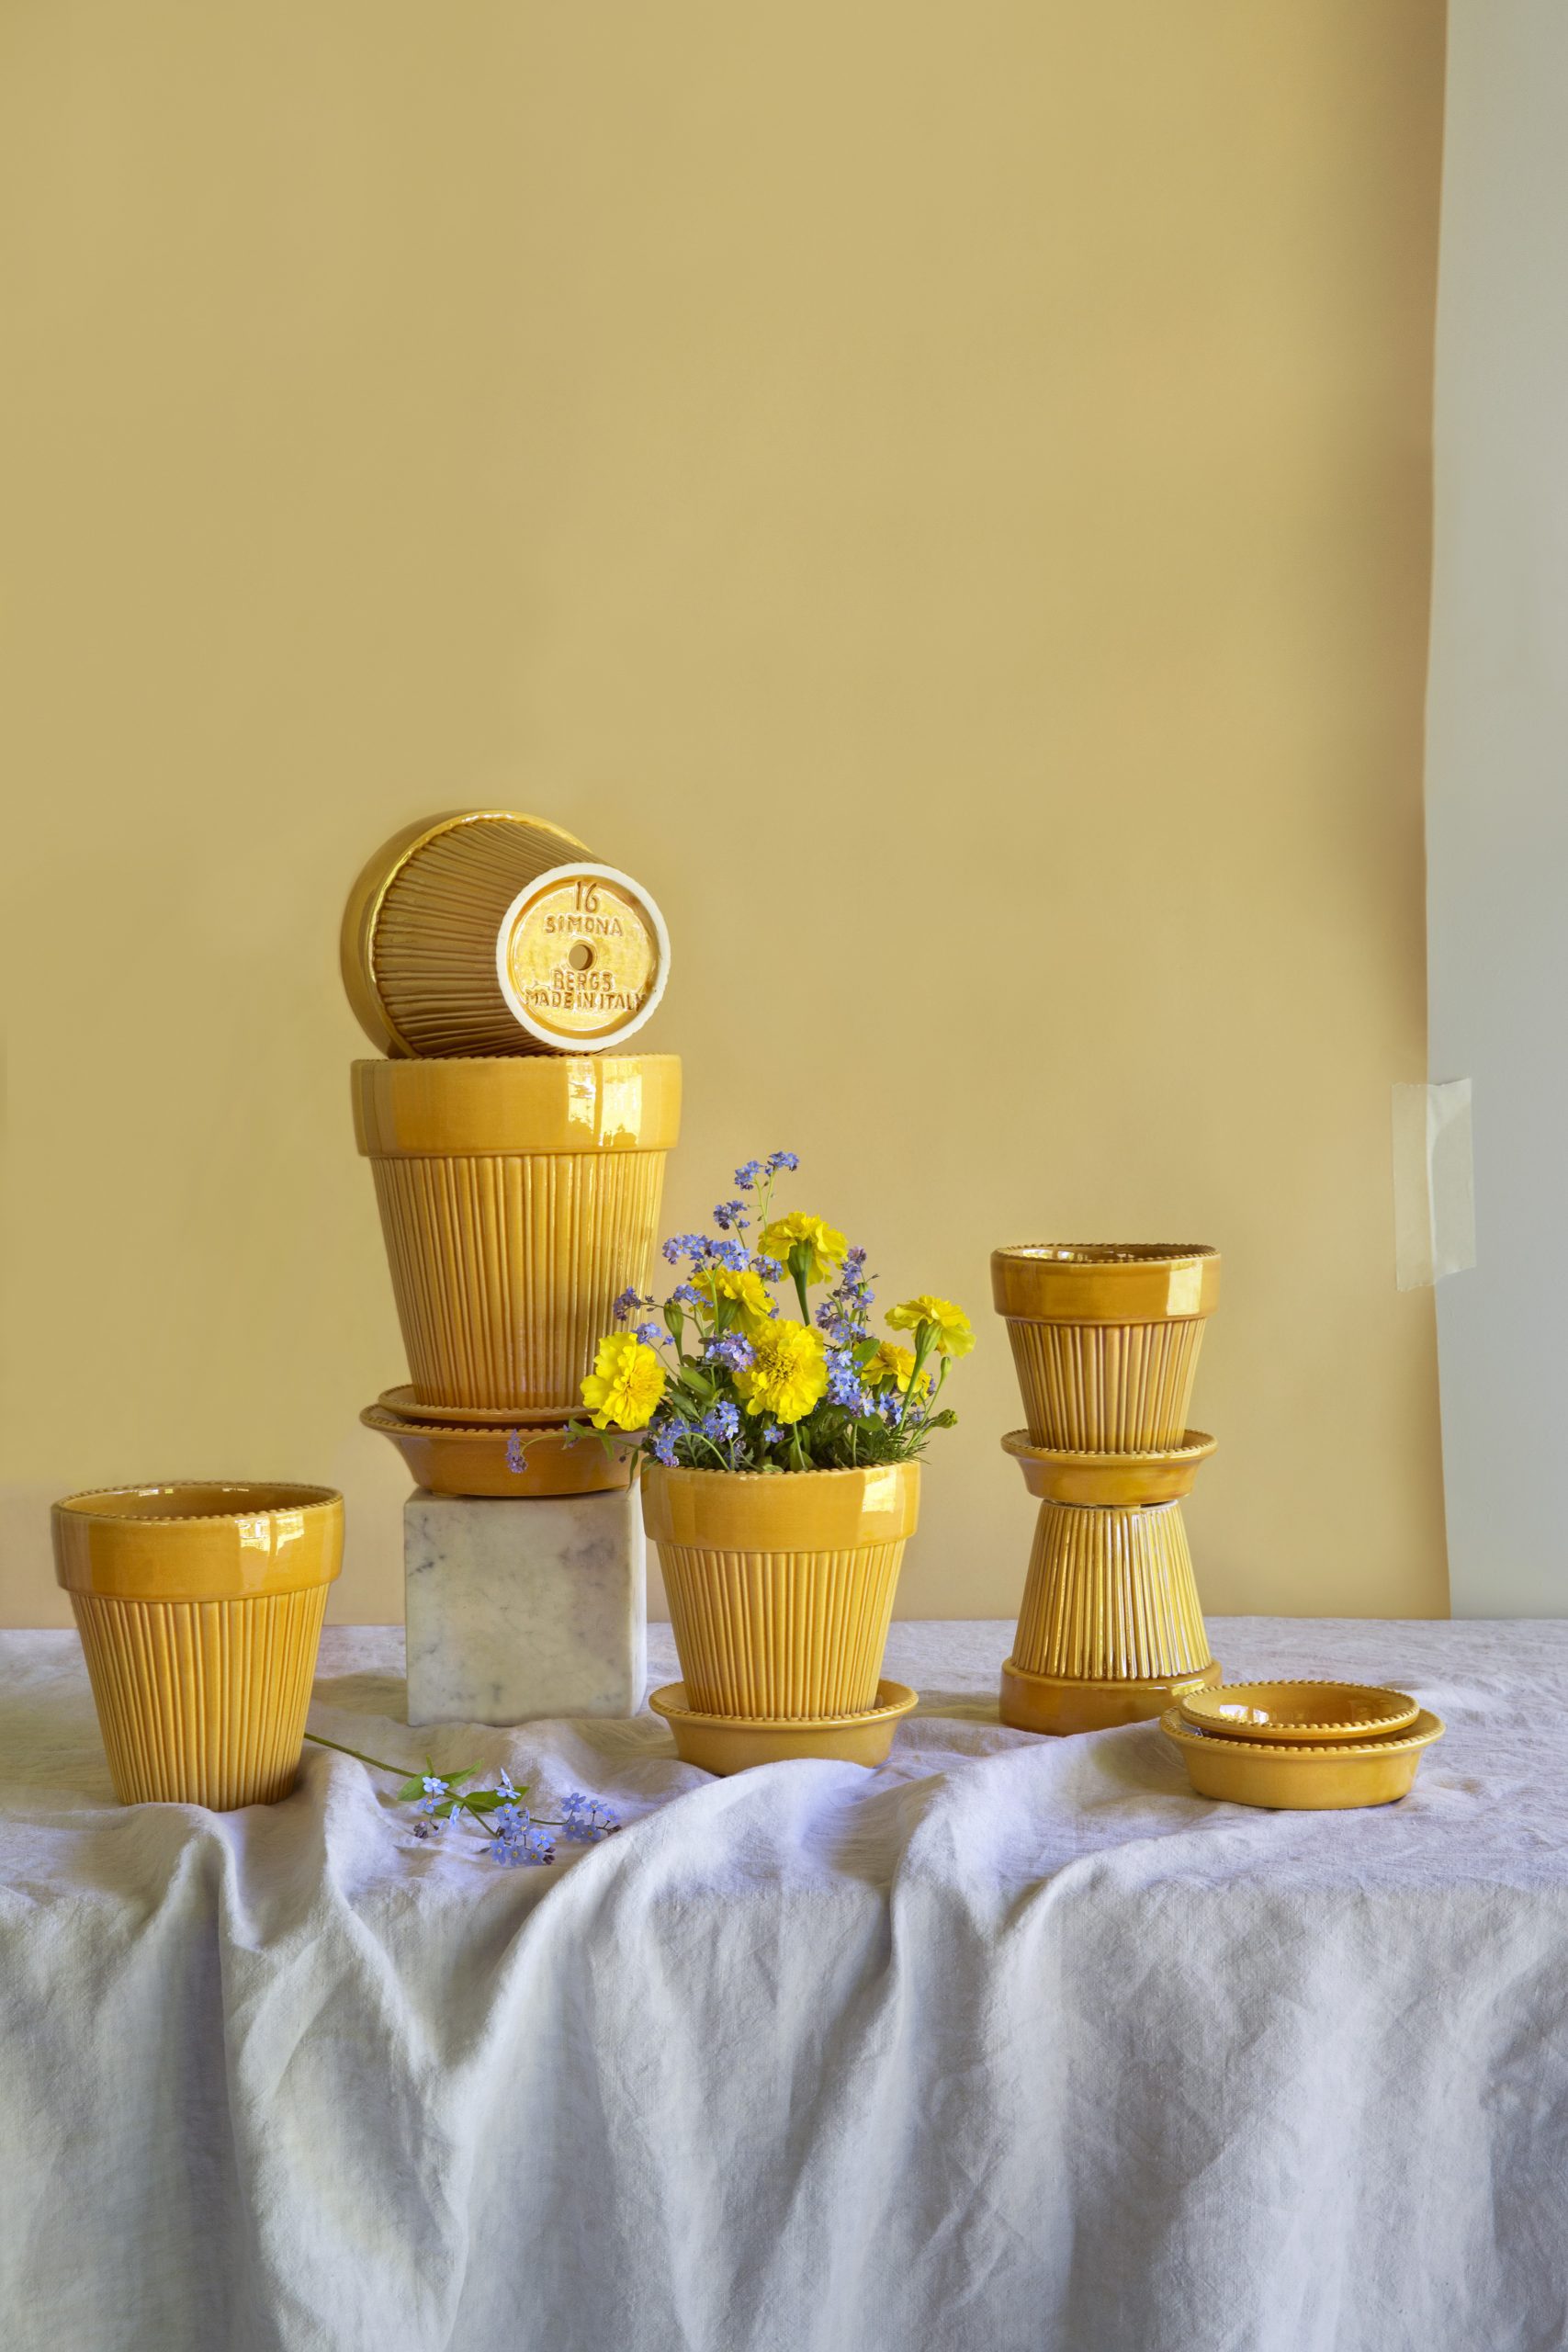 A collection of glazed amber yellow pots is arranged on a table.